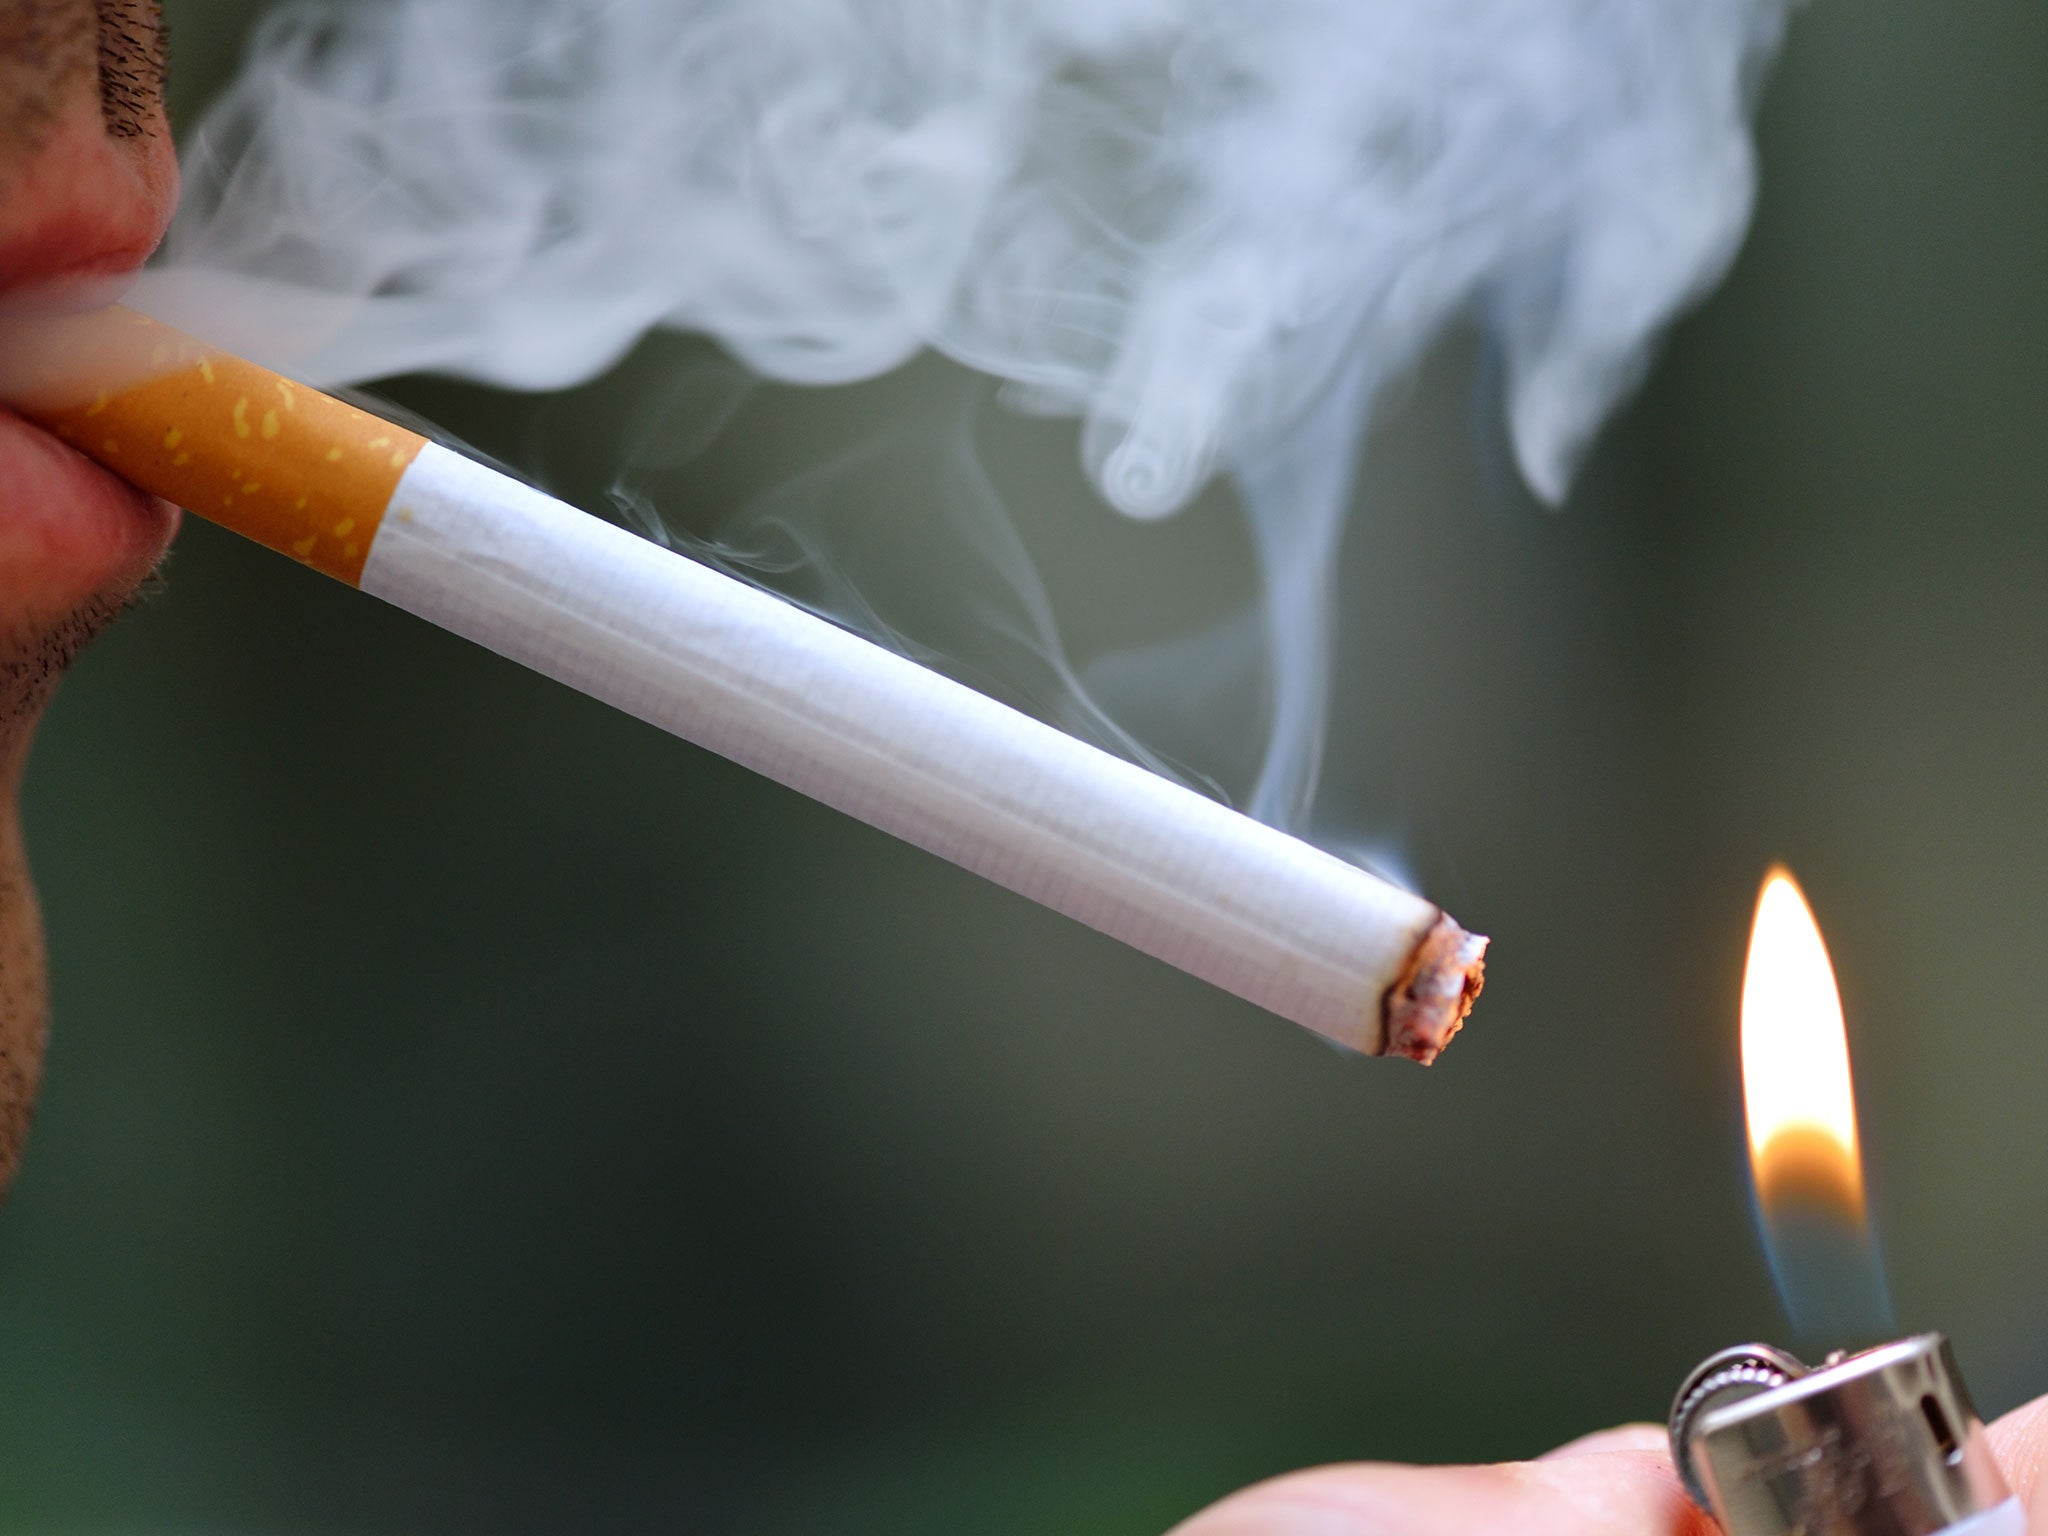 Axa says it no longer sees tobacco as an attractive investment